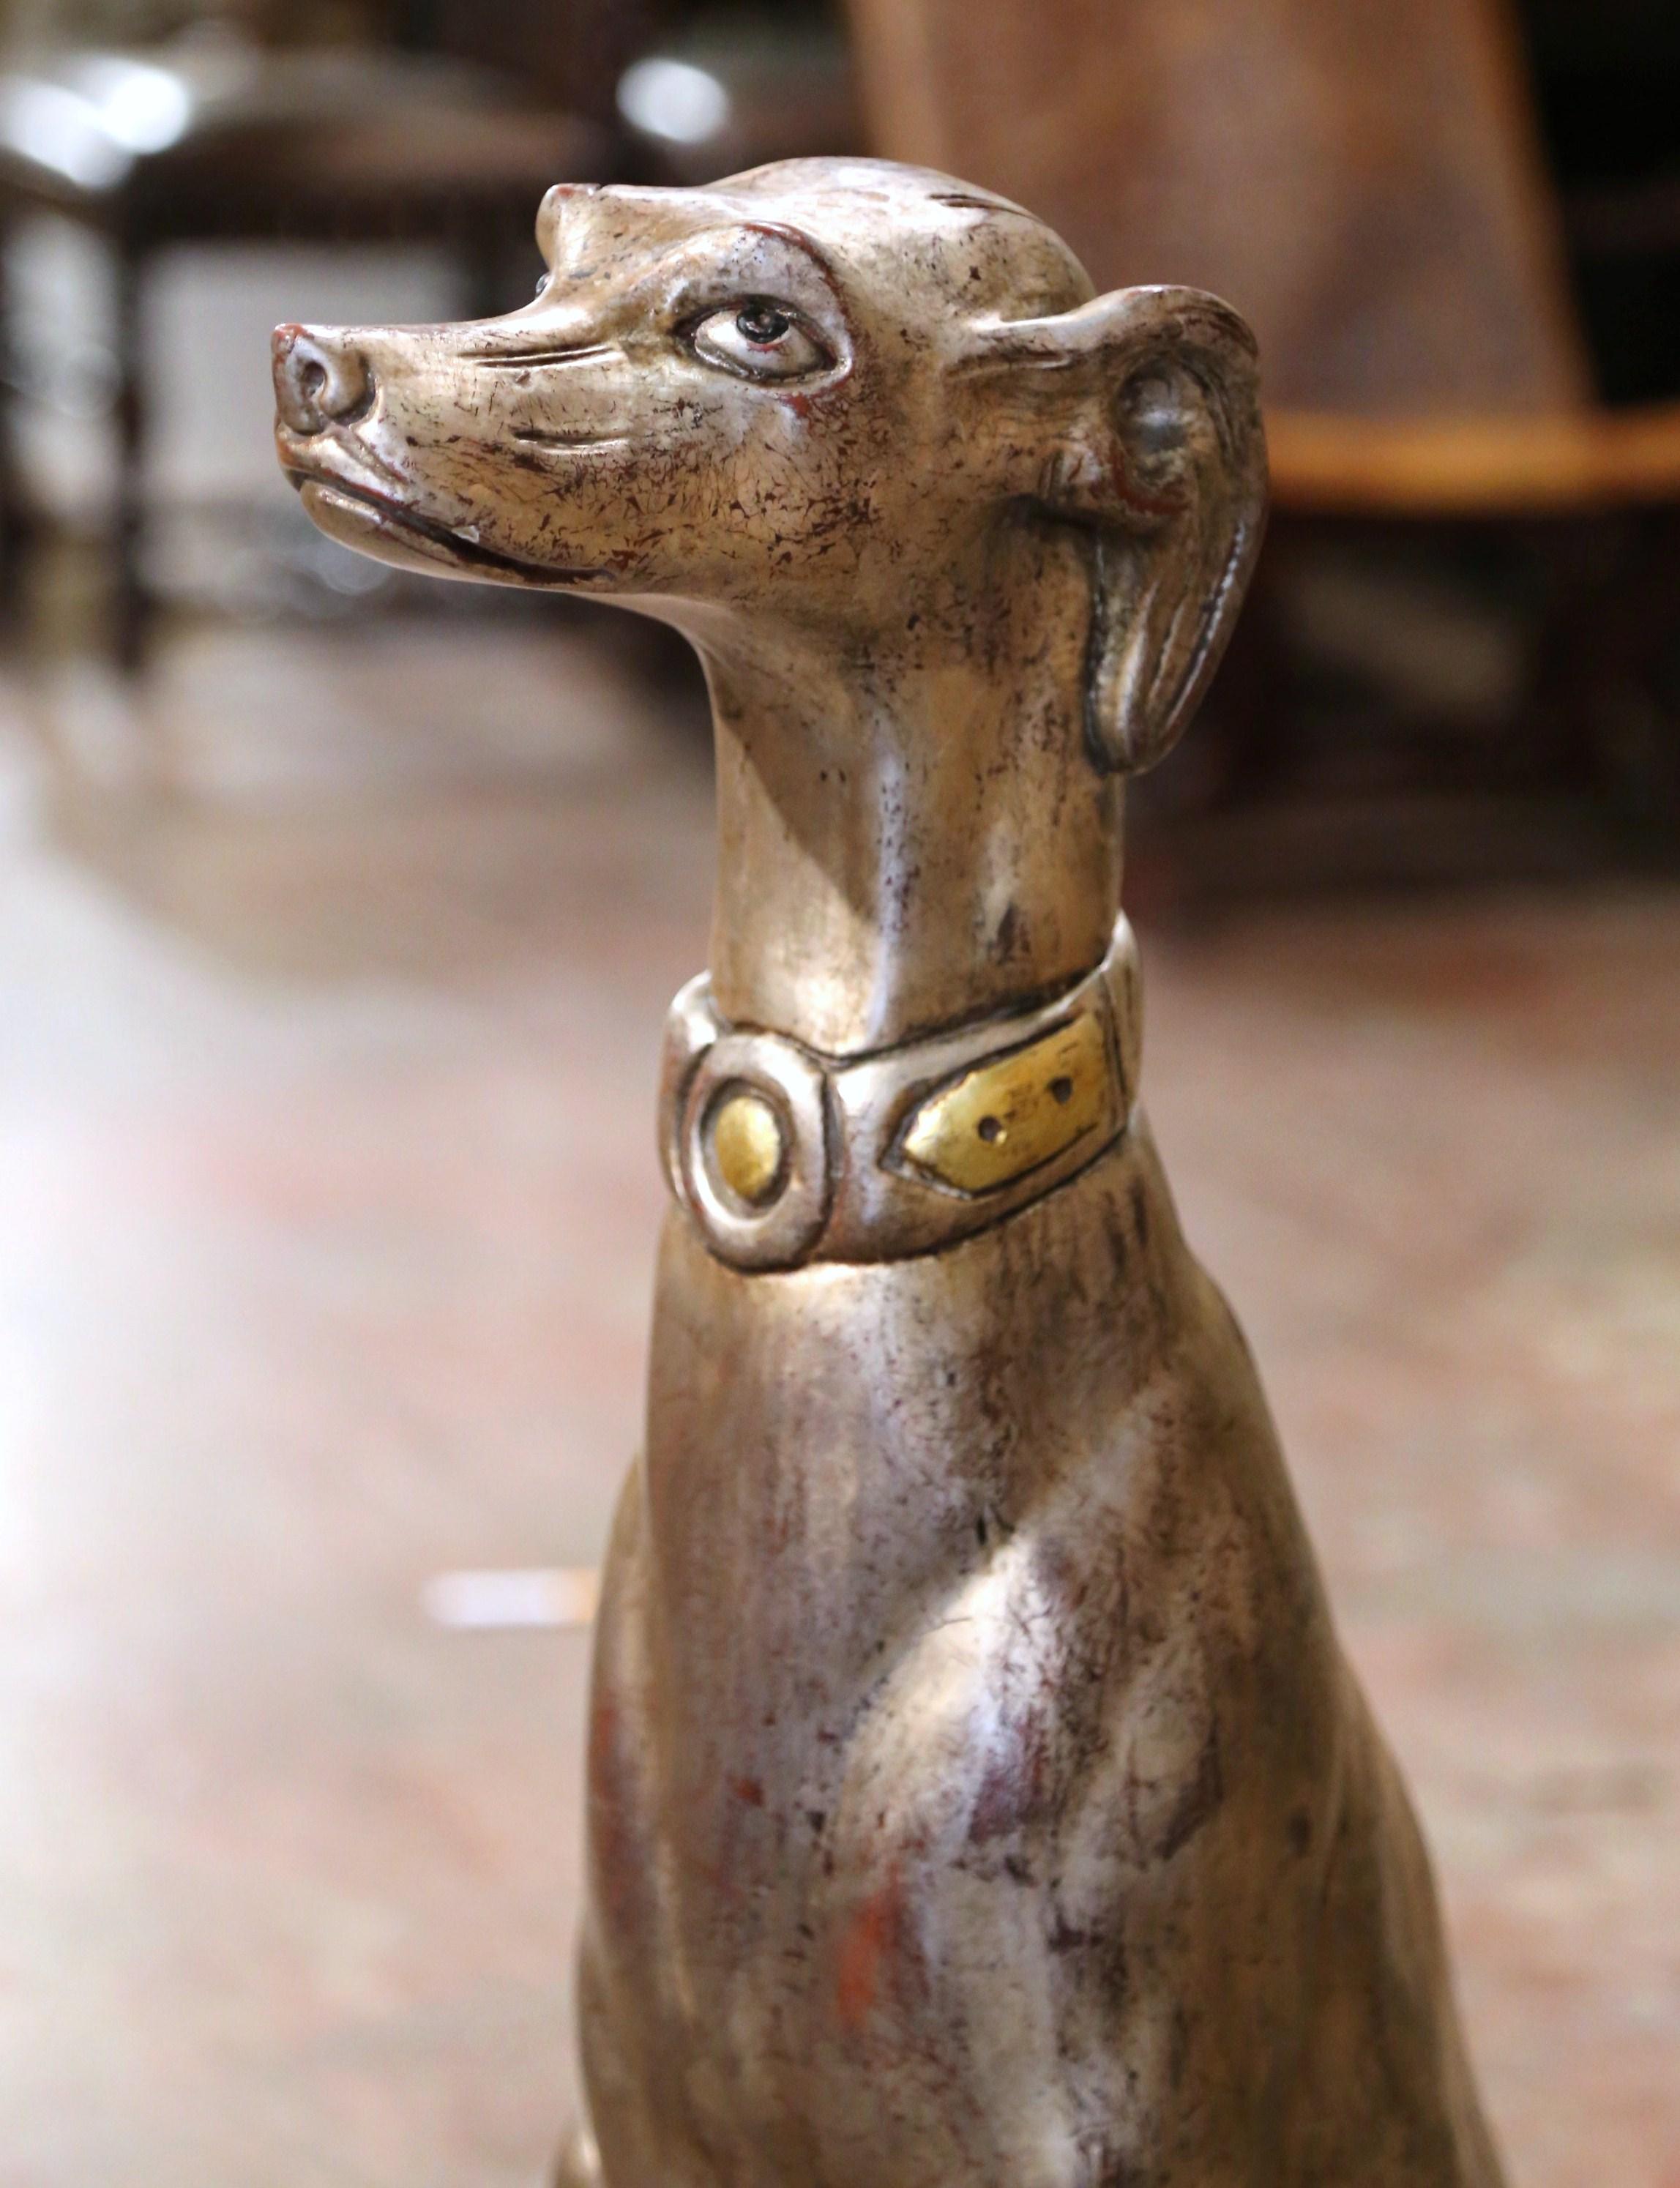 Hand carved near Venice, Italy, circa 1960, this large antique sculpture sits on an integral square red and gilt wooden pillow base; it features a greyhound figure sitting on back legs, its head up at attention as if ready to follow any command